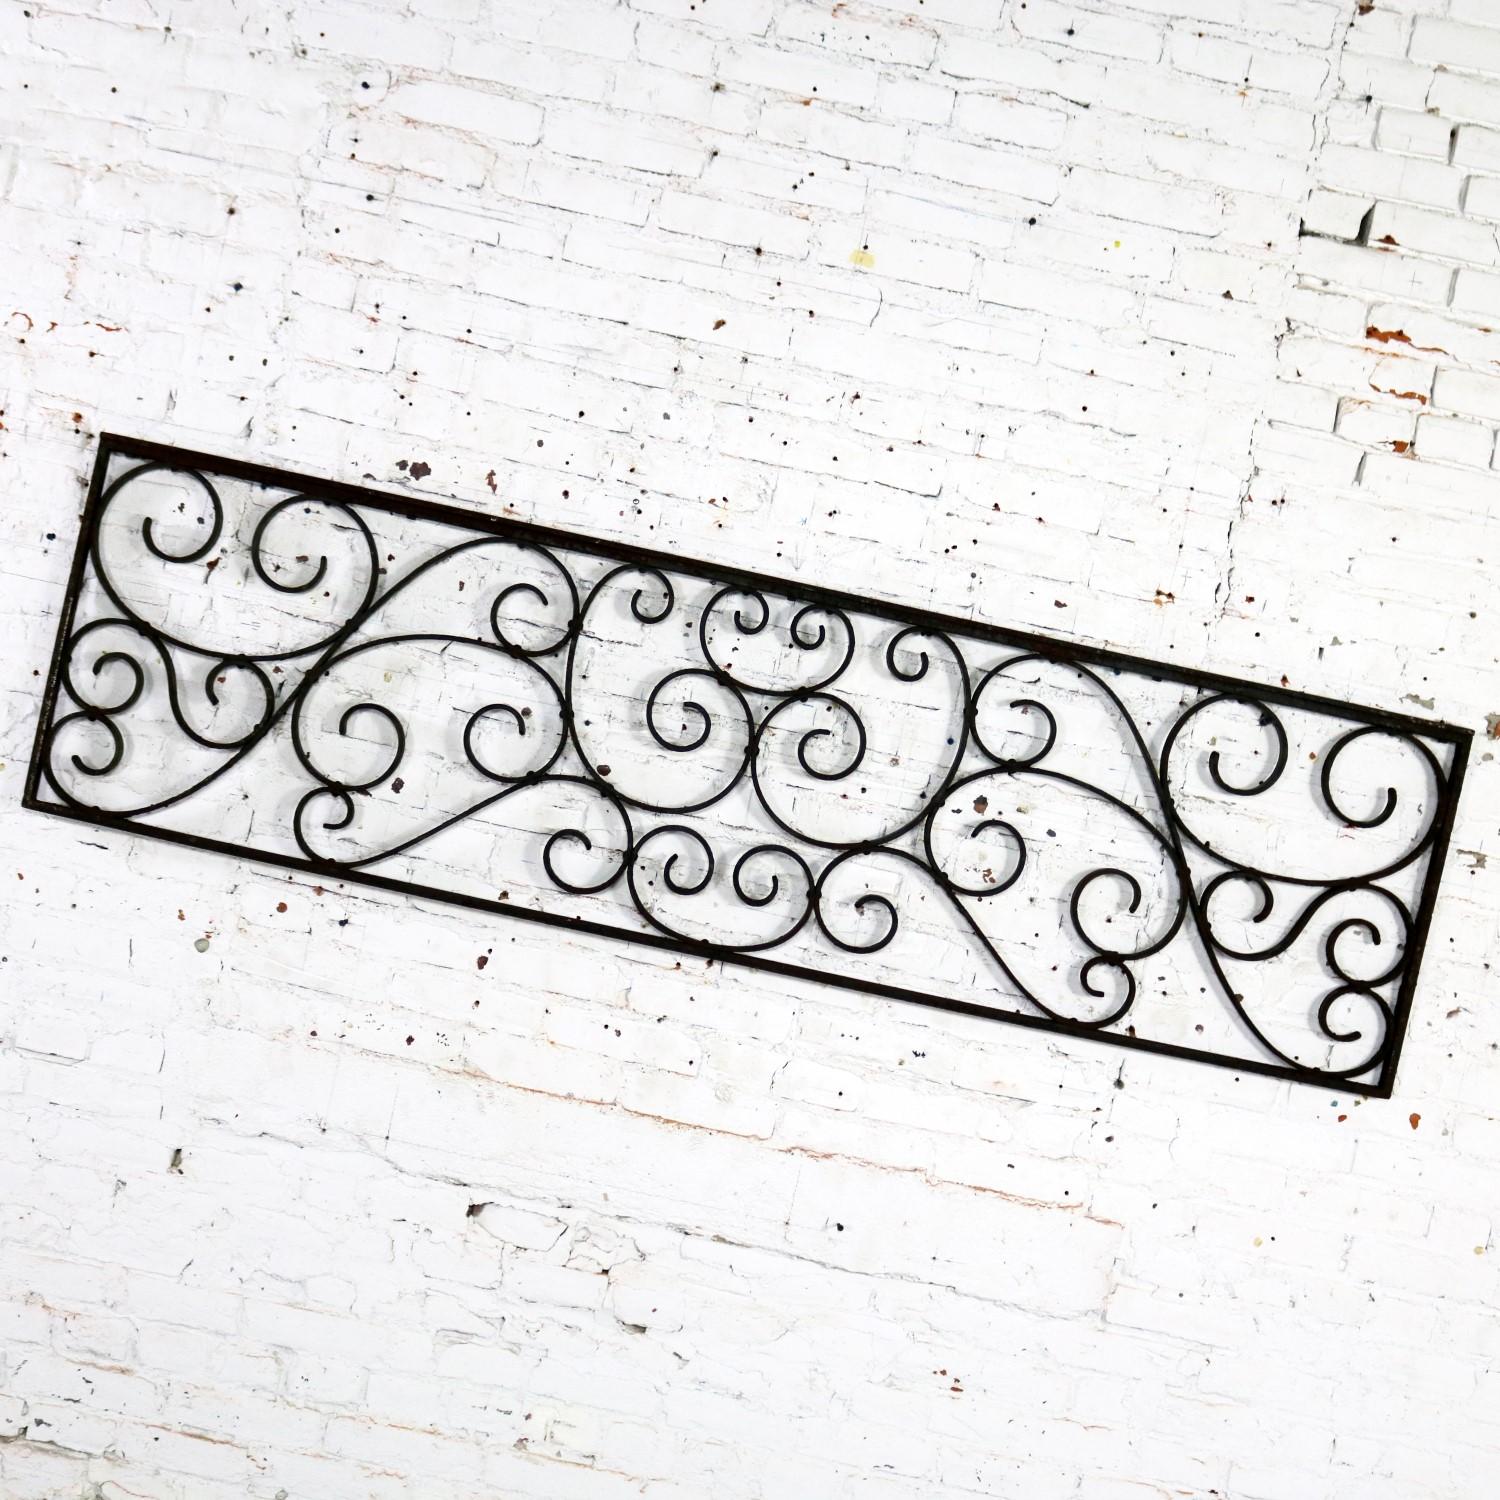 Antique Swirled Design Wrought Iron Railing Piece Trellis or Fence Section For Sale 1